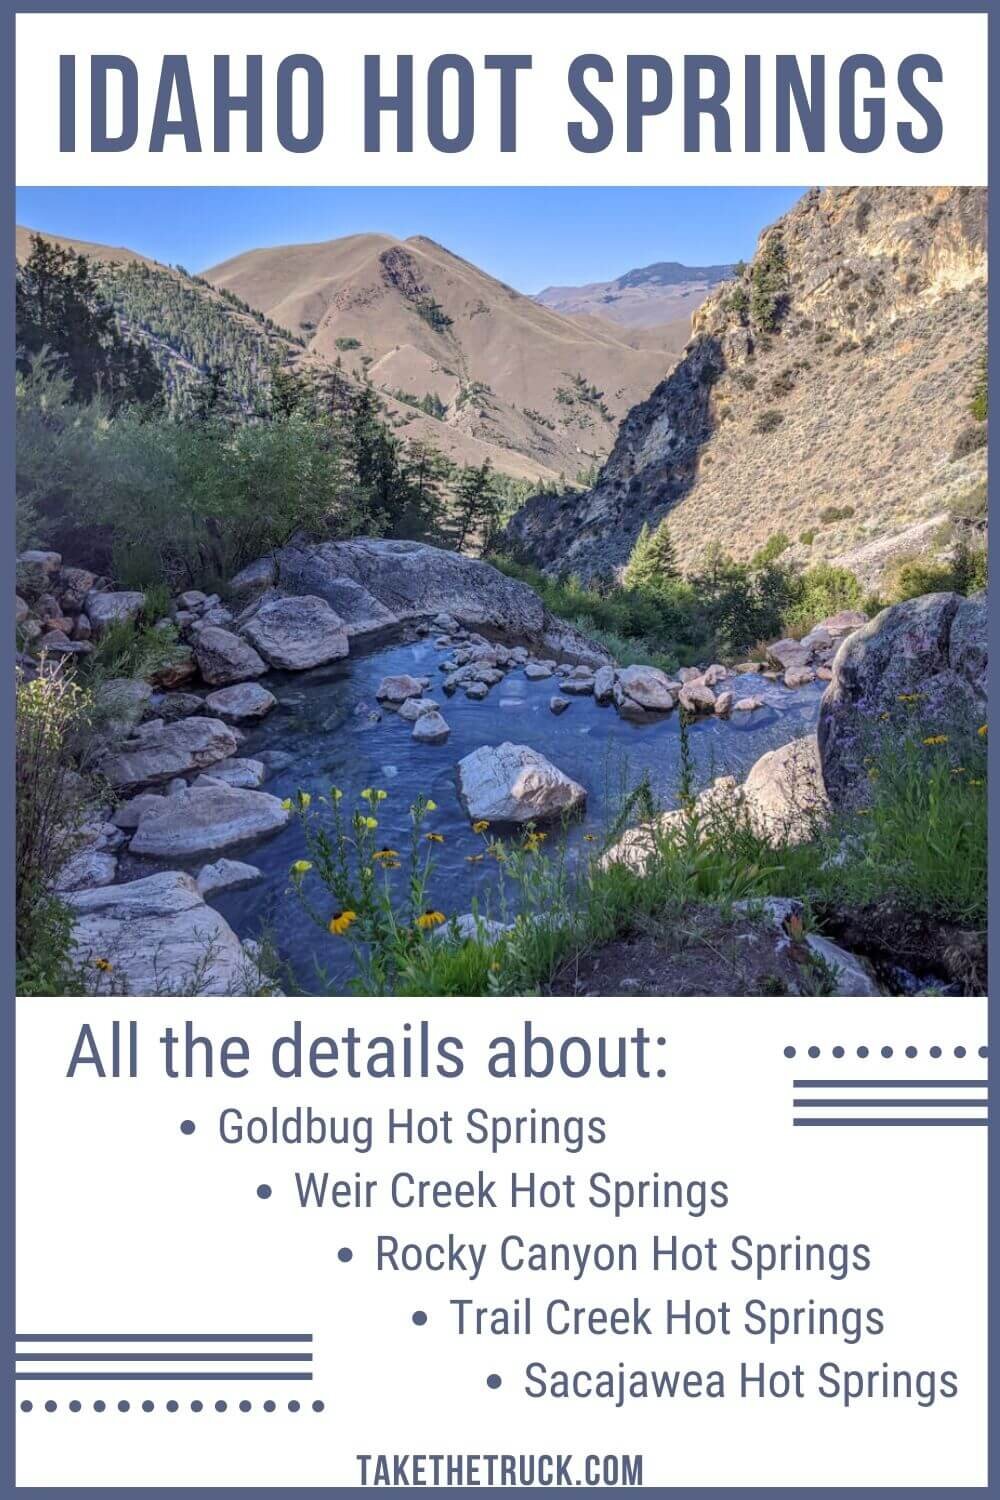 Check out these 5 awesome natural hot springs in Idaho - Rocky Canyon, Sacajawea, Weir Creek, Trail Creek, and Goldbug Hot Springs. Add these hot springs to your Idaho road trip list!